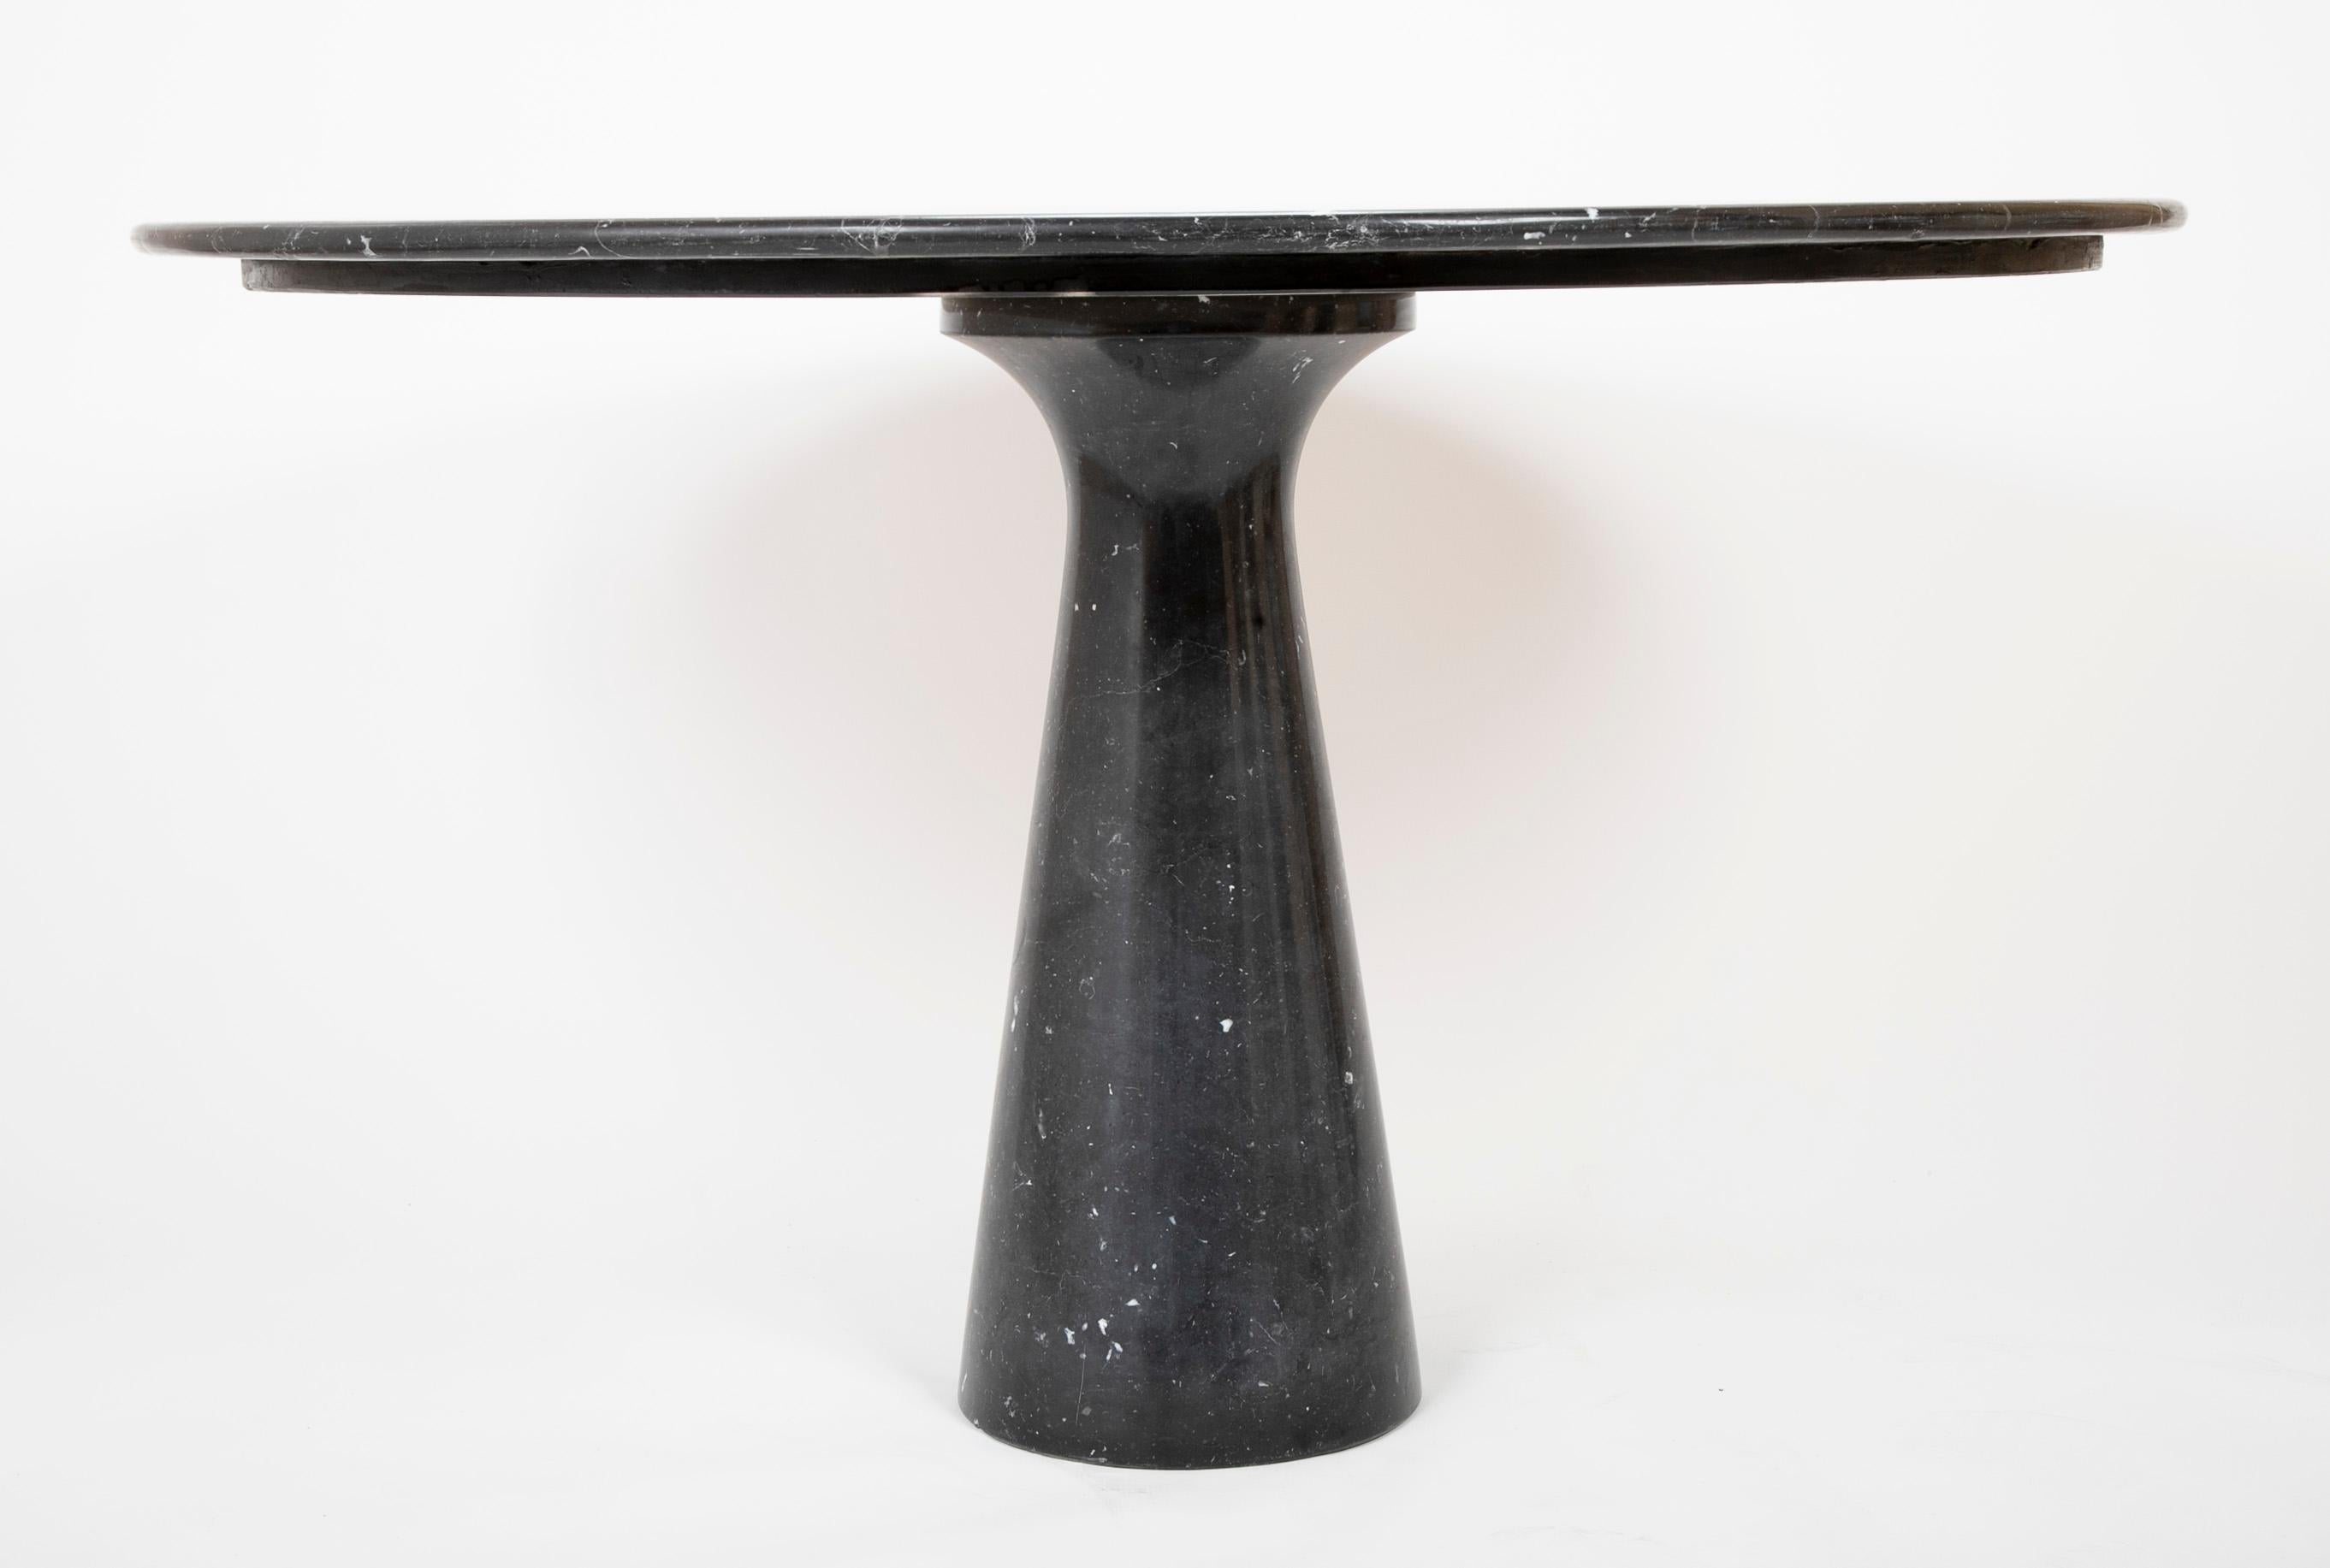 A polished marble Eros table designed by Angelo Mangiarotti and produced by Skipper. The marble with white veins is known as black 